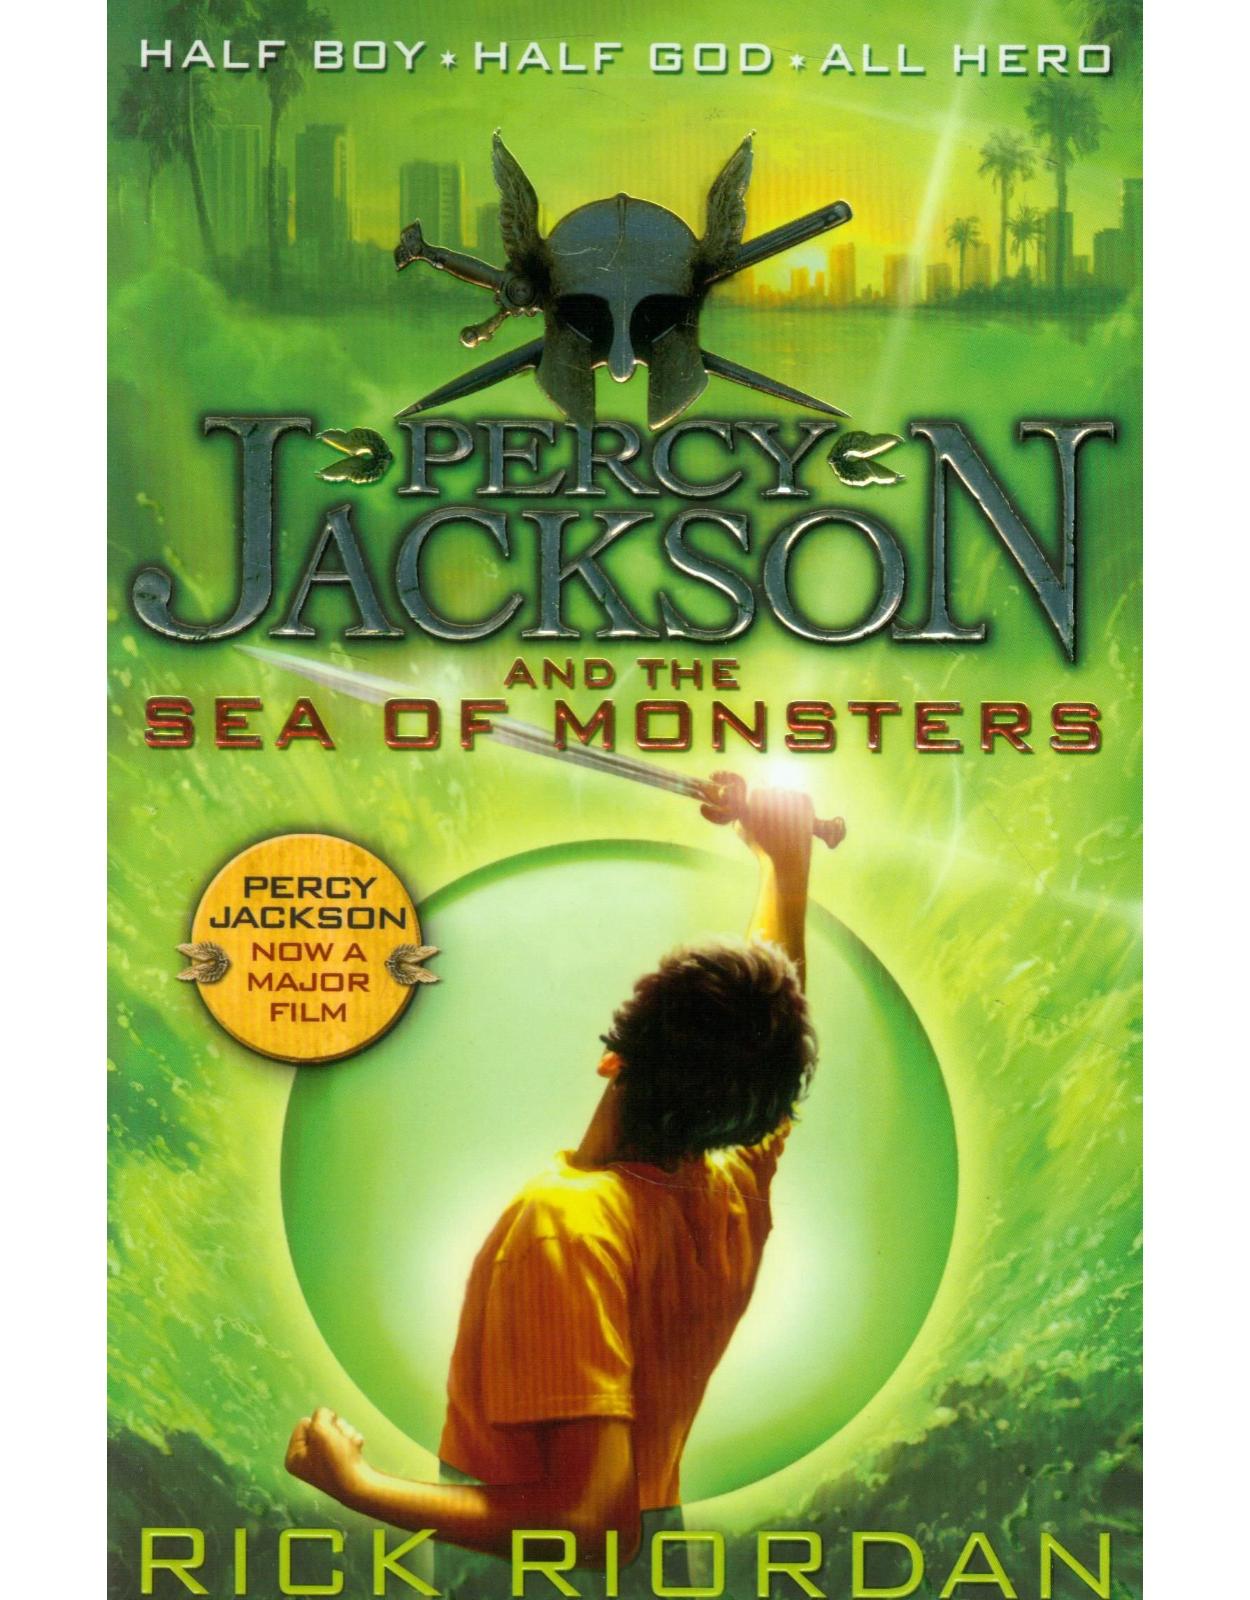 The Sea of Monsters: Percy Jackson and the Olympians, Book 2